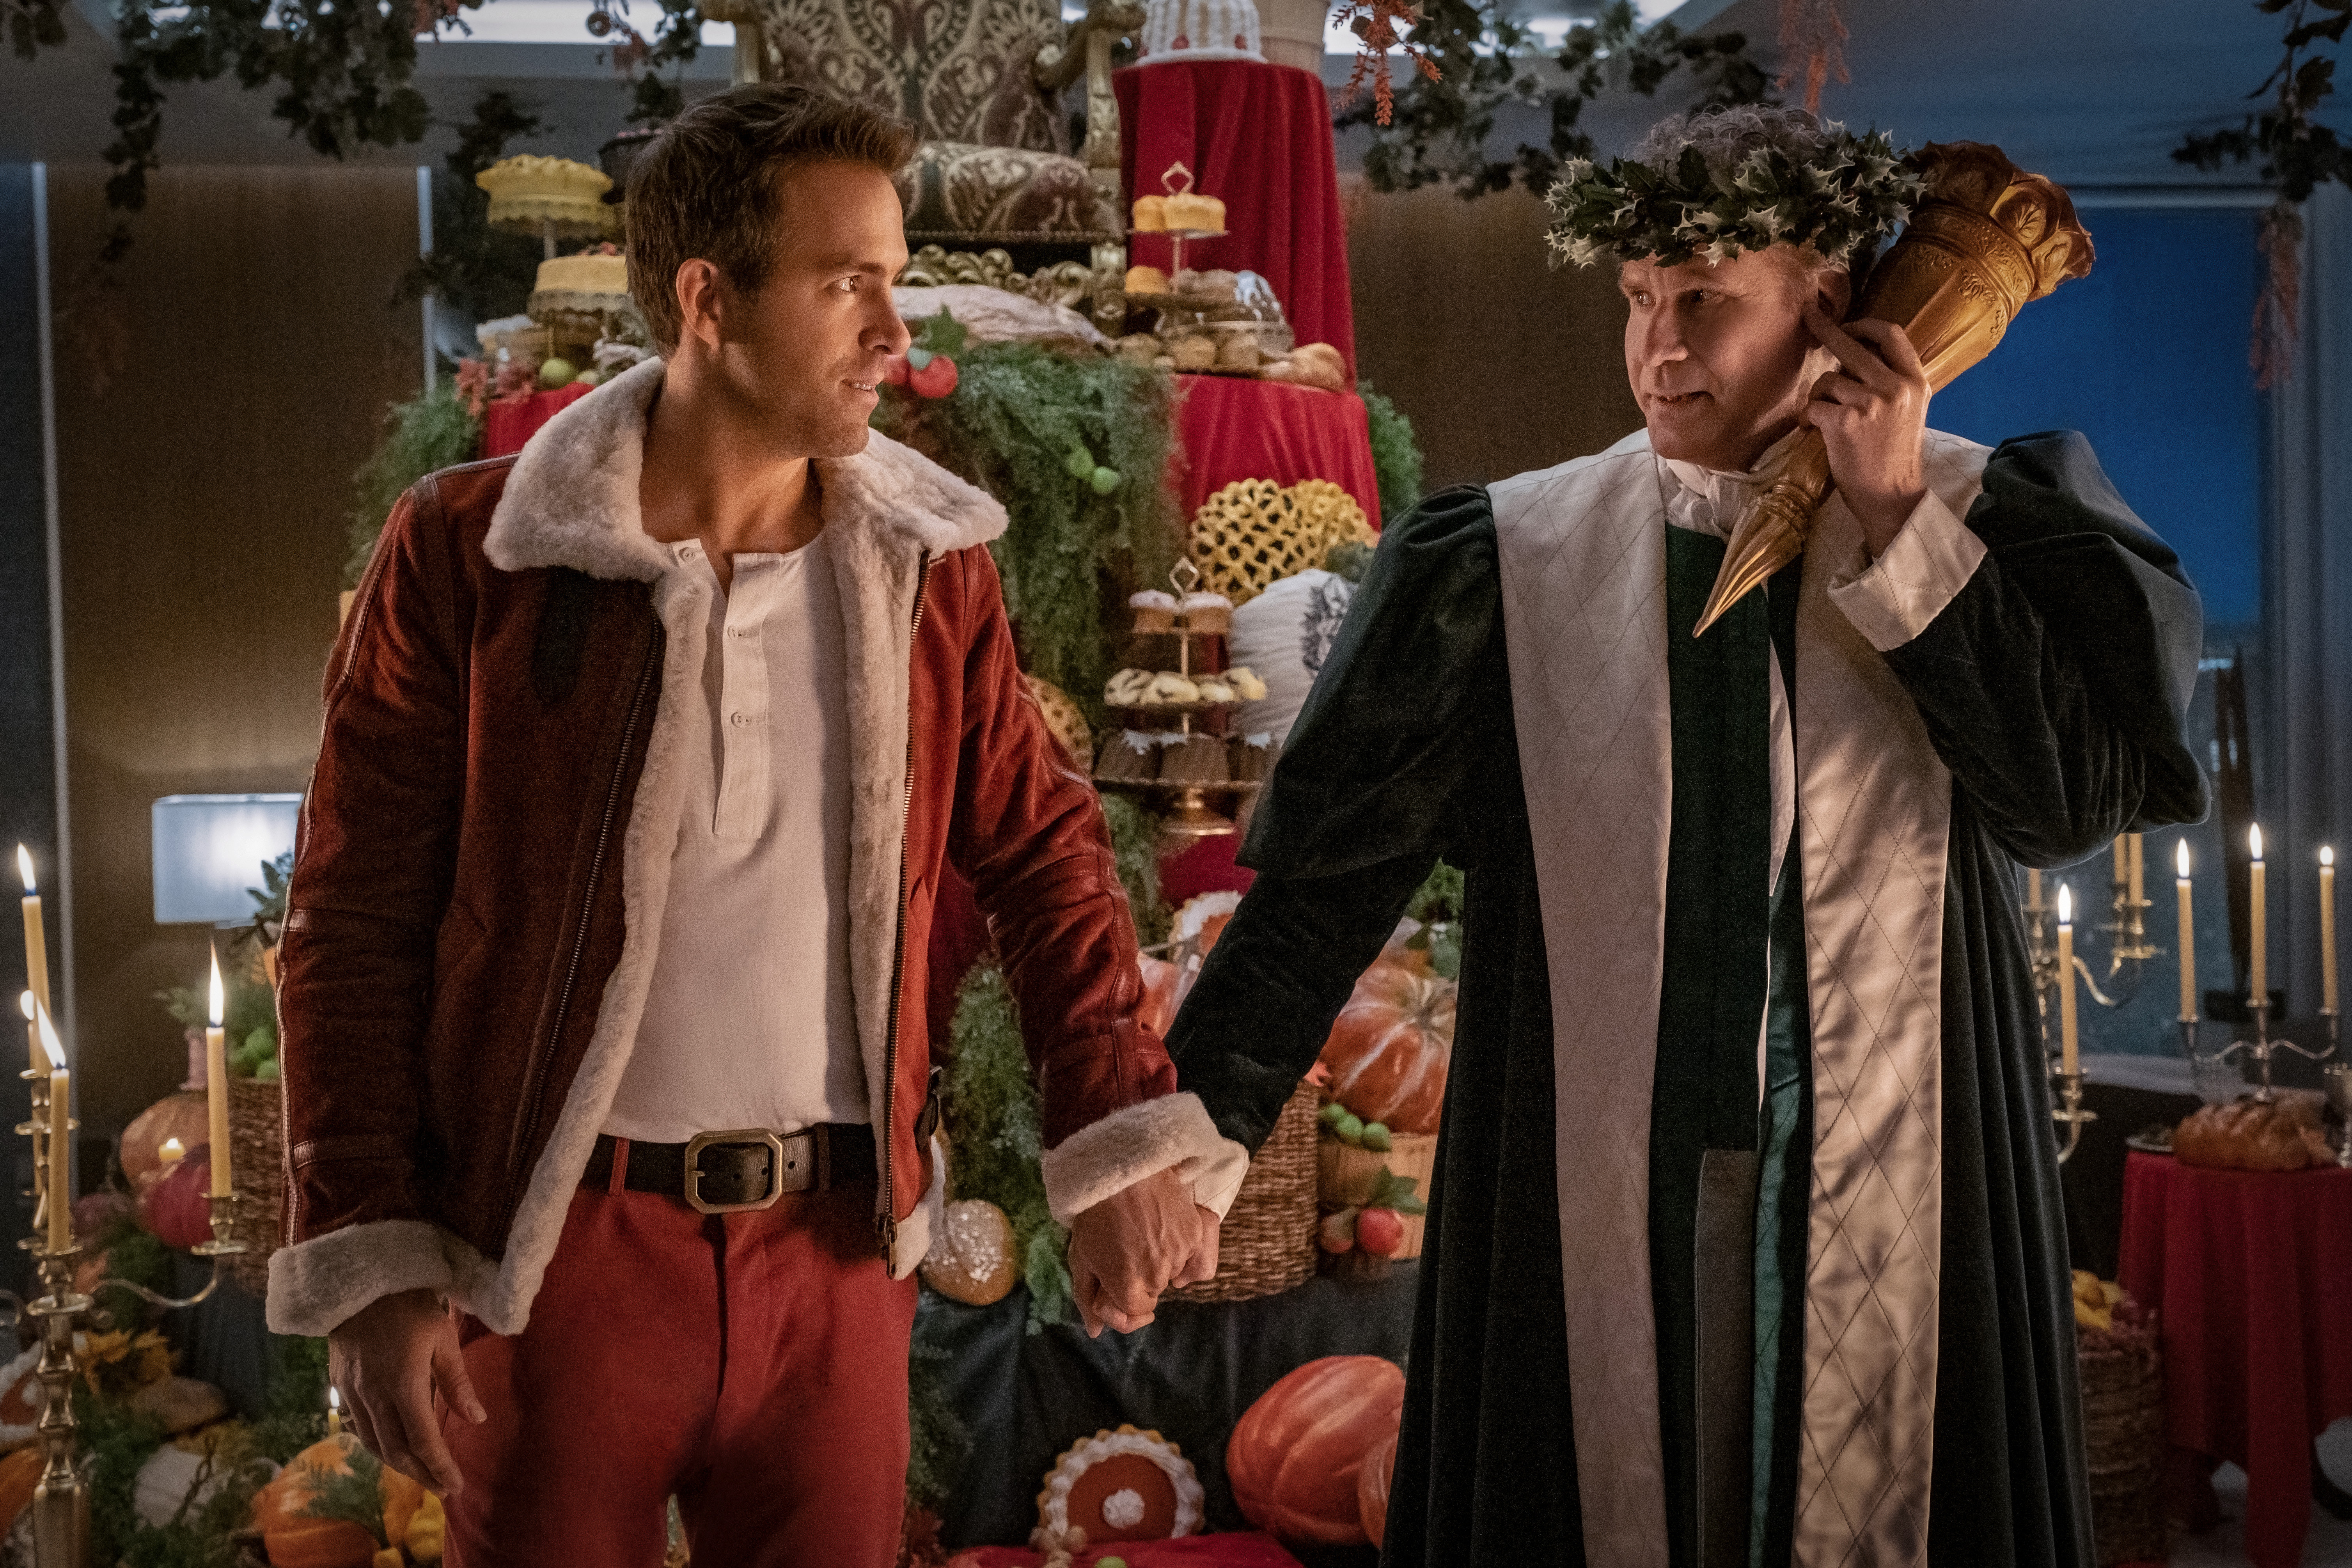 A man wearing a red and white outfit (Ryan Reynolds) holds hands with a man in a green and white outfit (Will Ferrell) with a wreath of holly on his head holding an unlit torch to his ear.